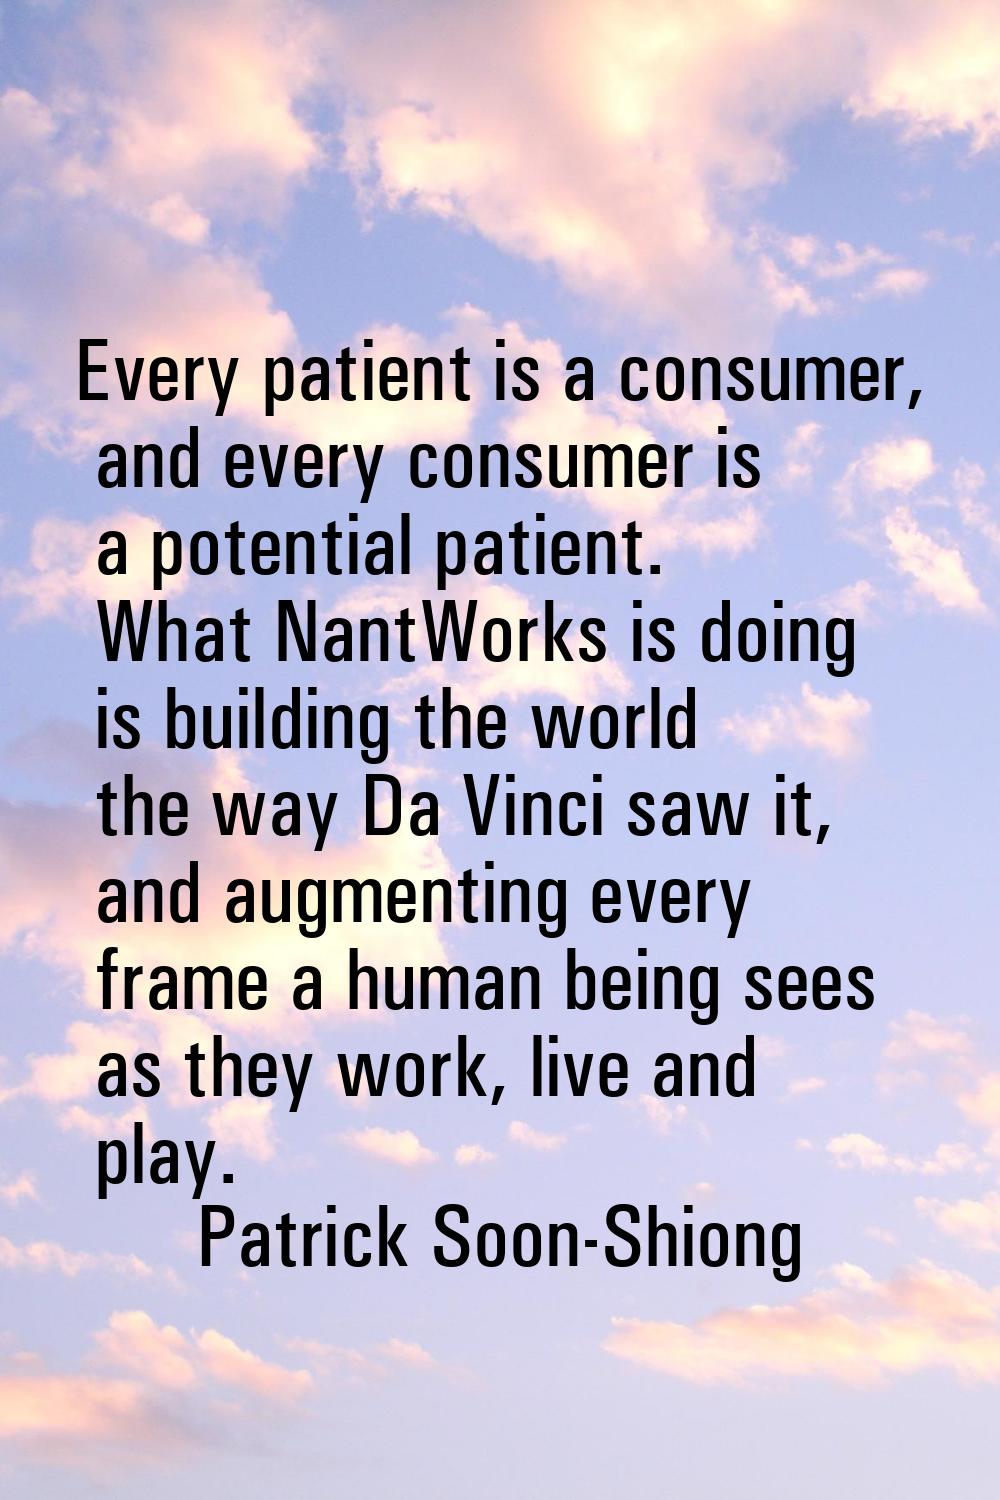 Every patient is a consumer, and every consumer is a potential patient. What NantWorks is doing is 